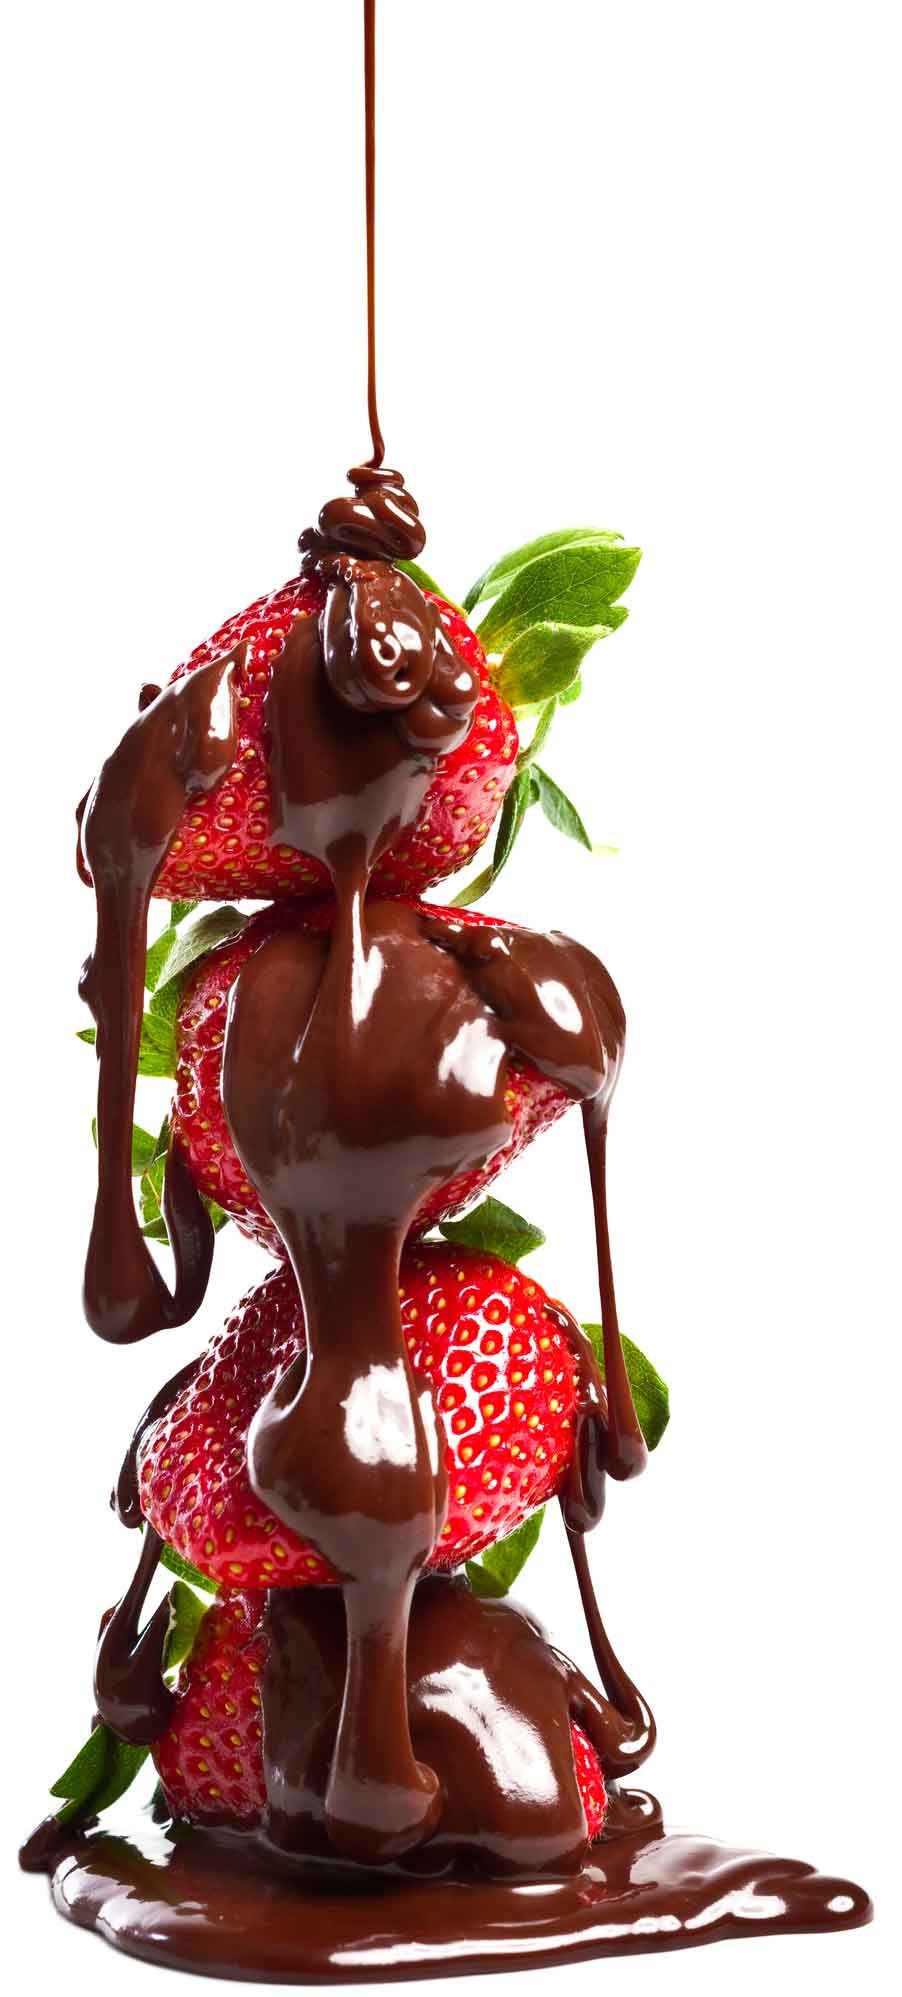 A strawberry covered in chocolate sauce on a white background